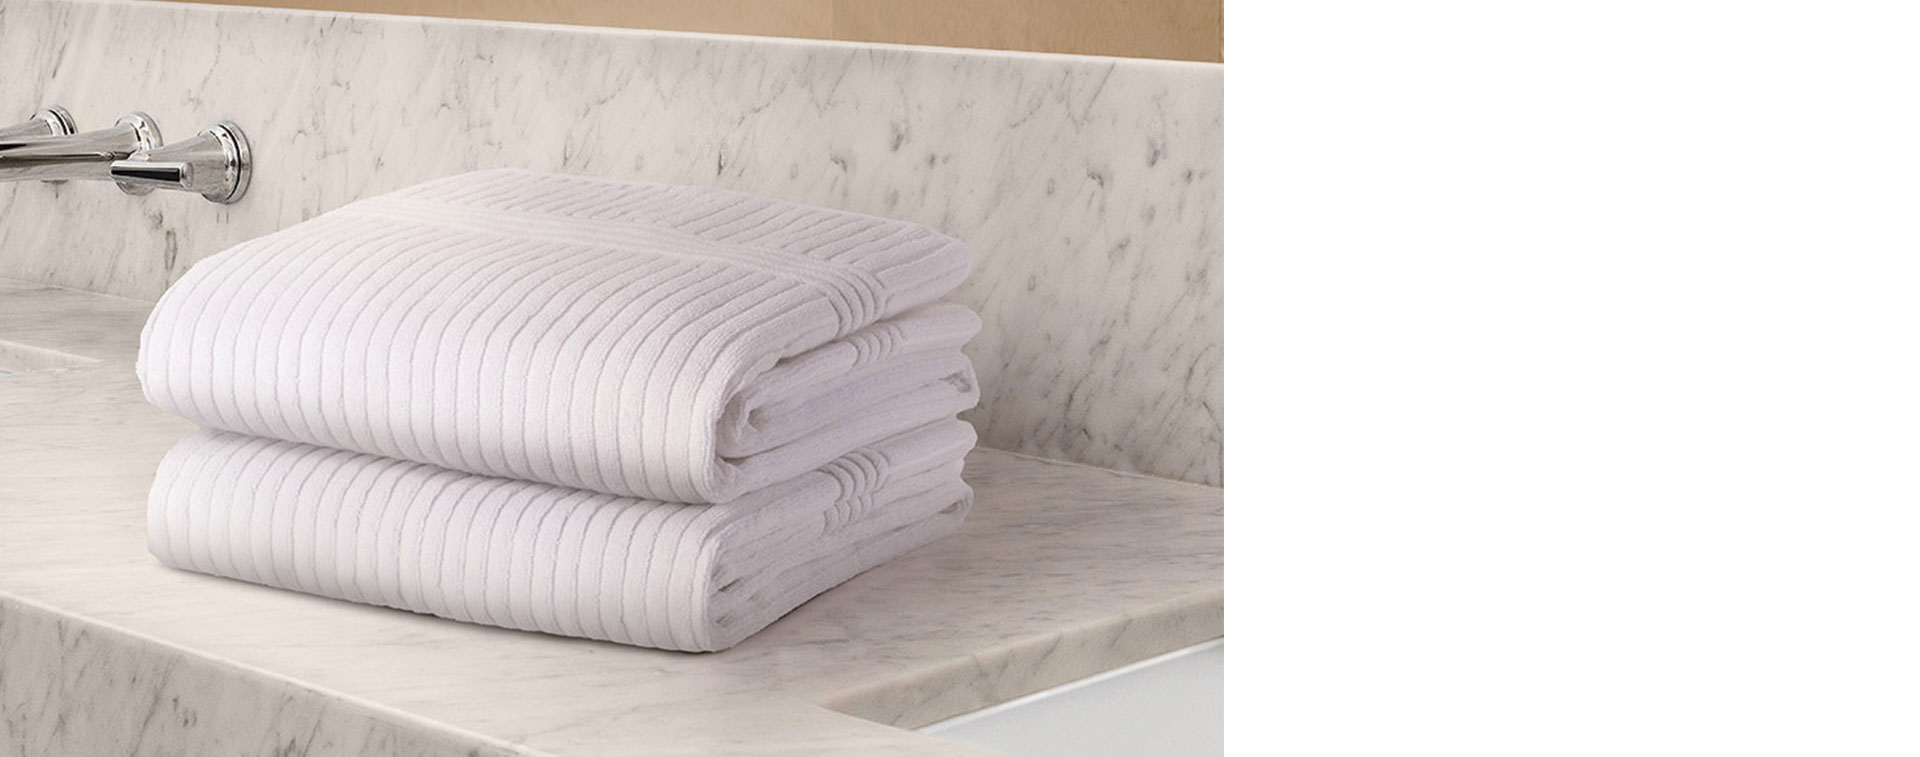 Towels stacked on a marmol top